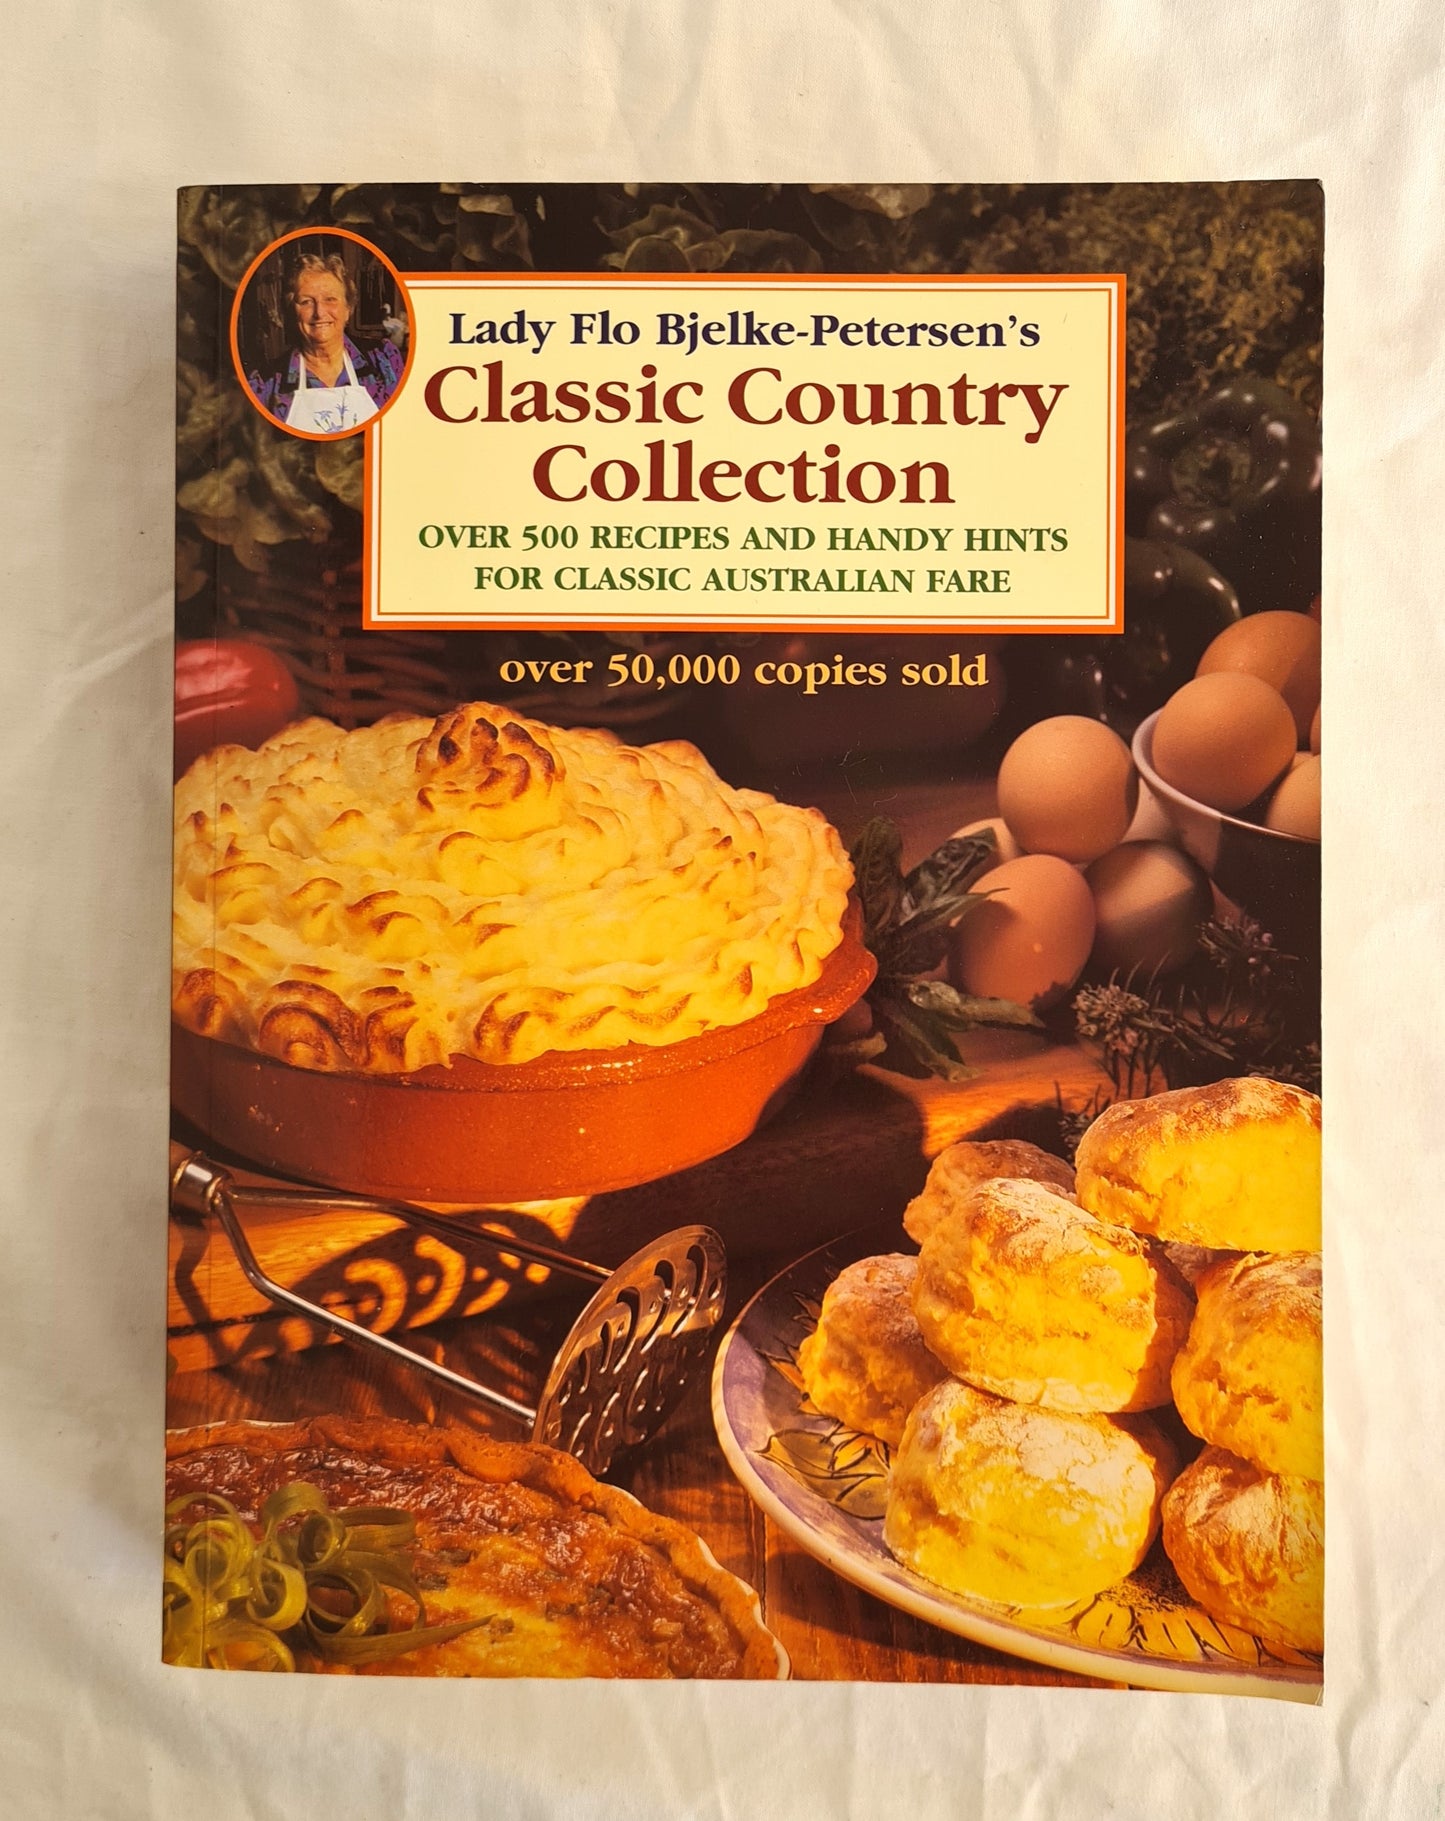 Classic Country Collection by Lady Flo Bjelke-Petersen